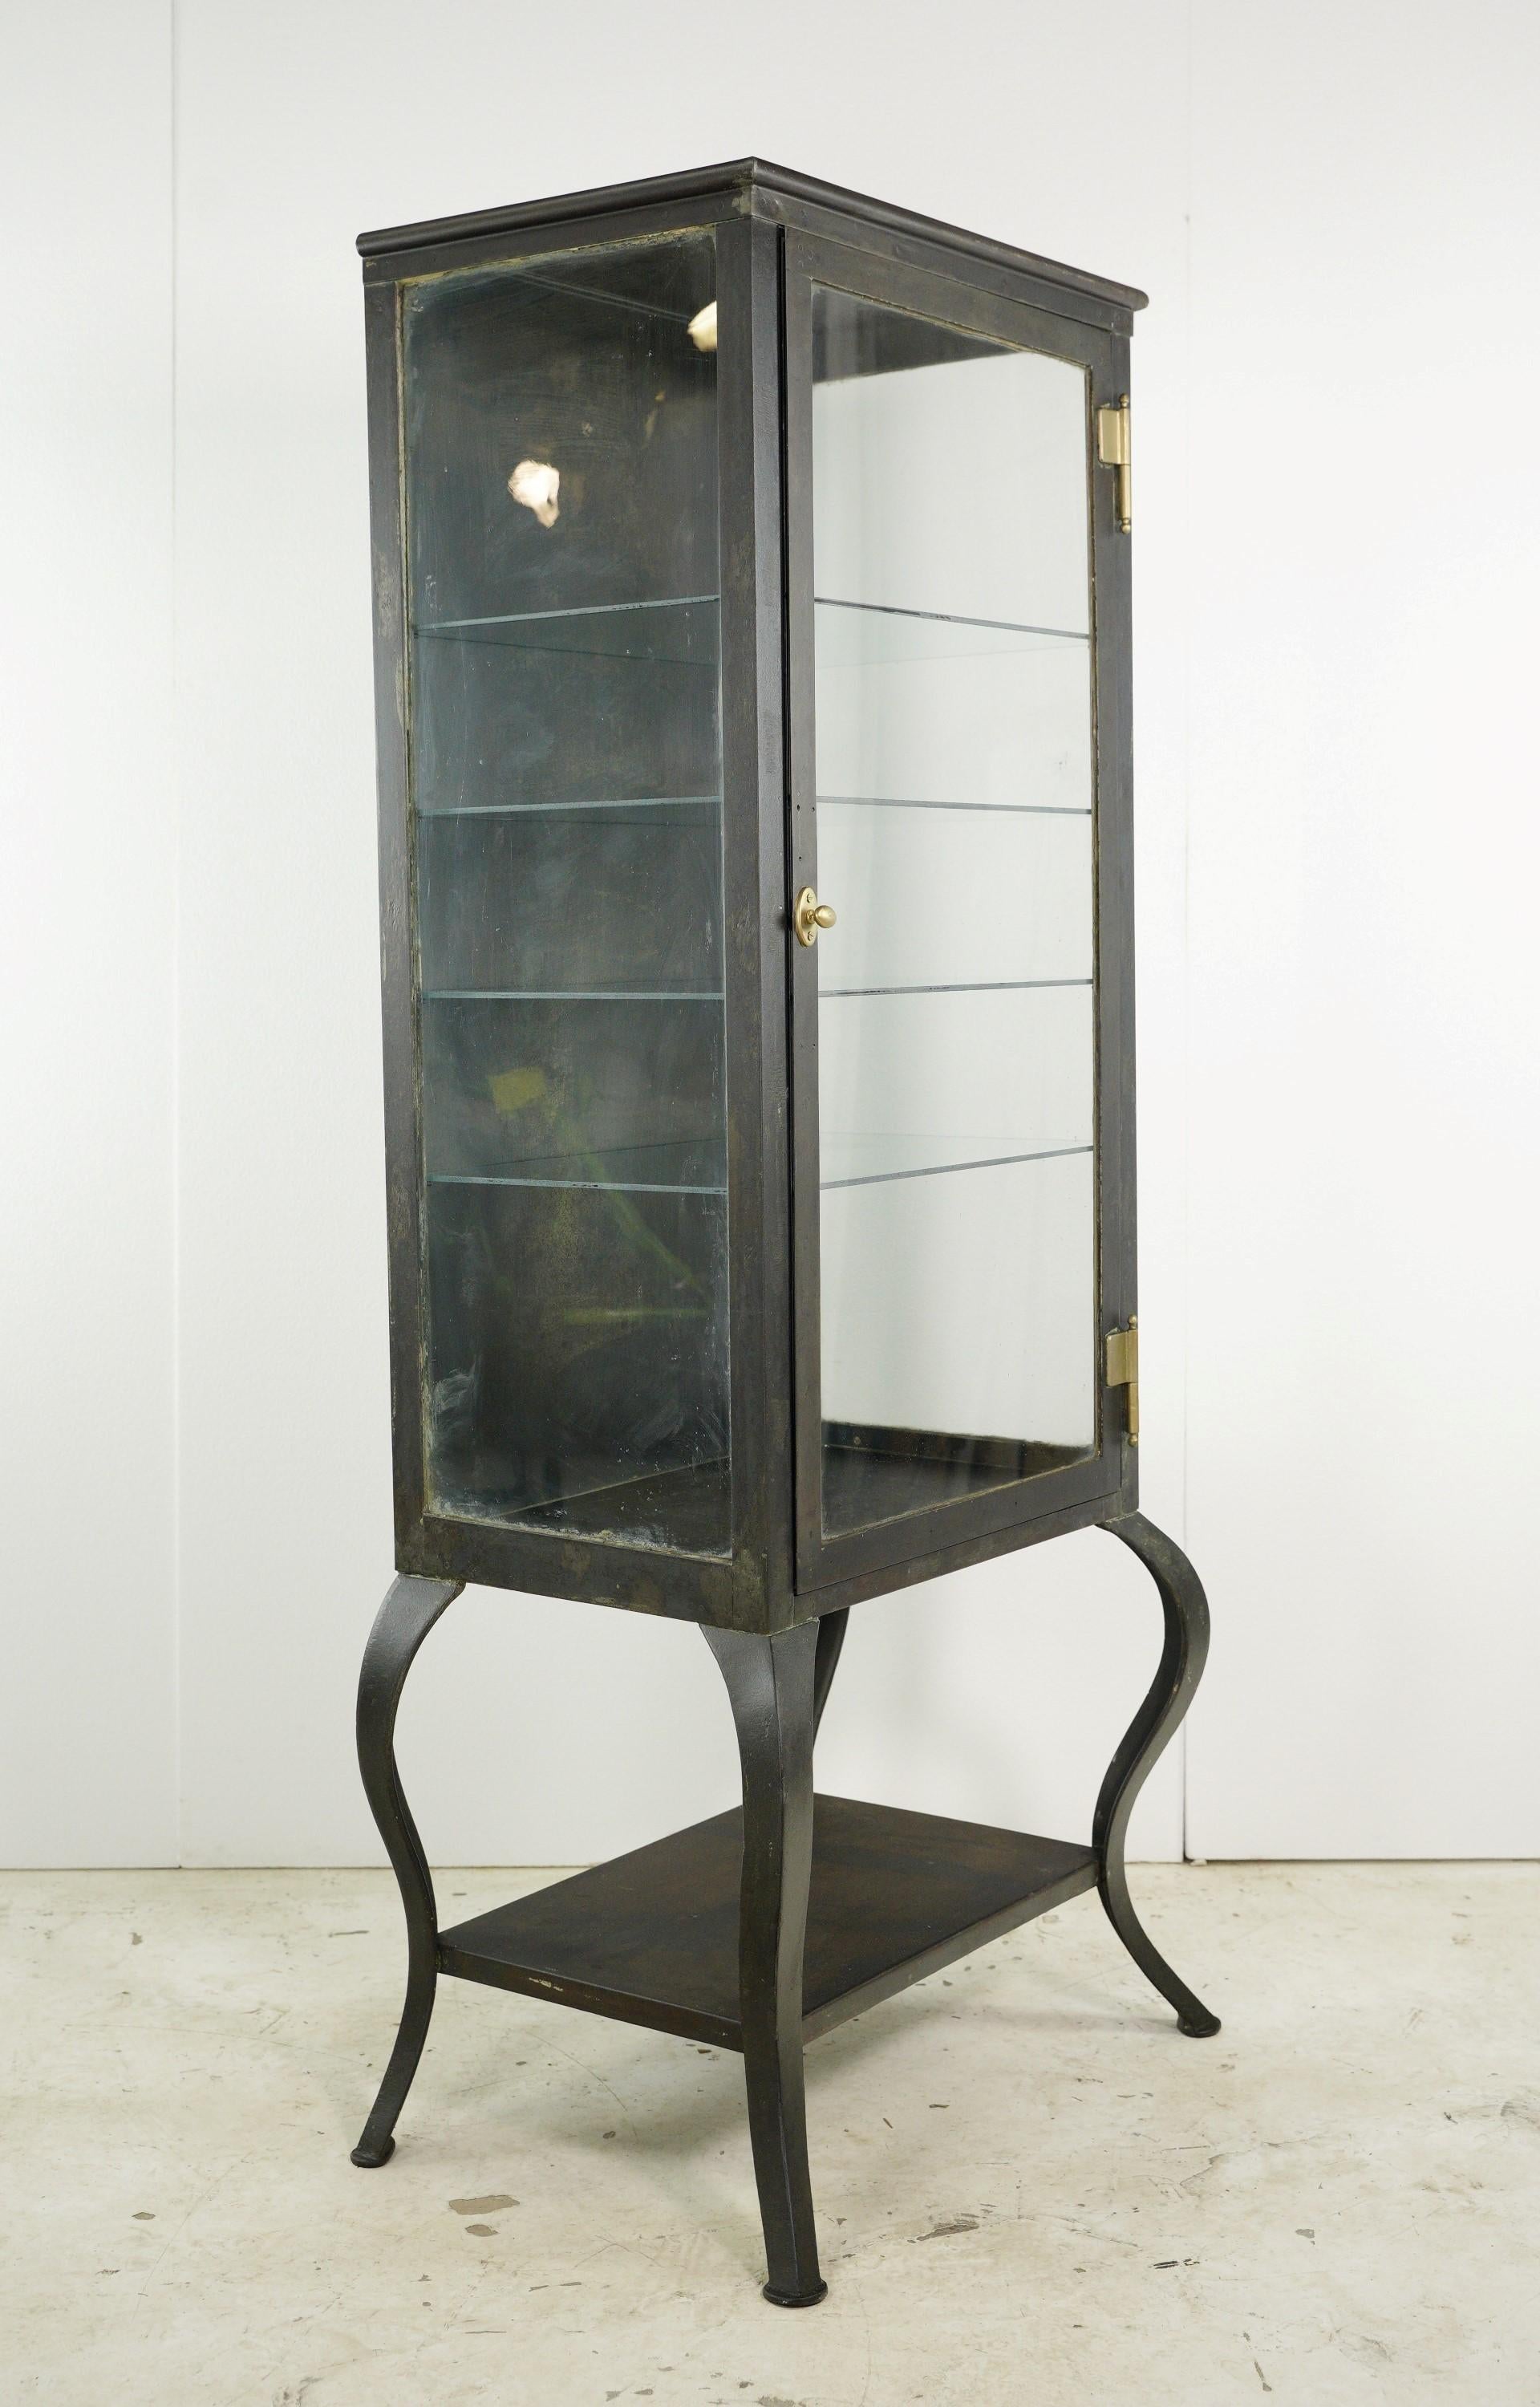 This restored antique steel glass shelves medical cabinet is a true gem of the past. With its sturdy steel frame, brass hardware, cabriole legs, and four glass shelves, it showcases antique craftsmanship. This cabinet offers storage and adds a touch